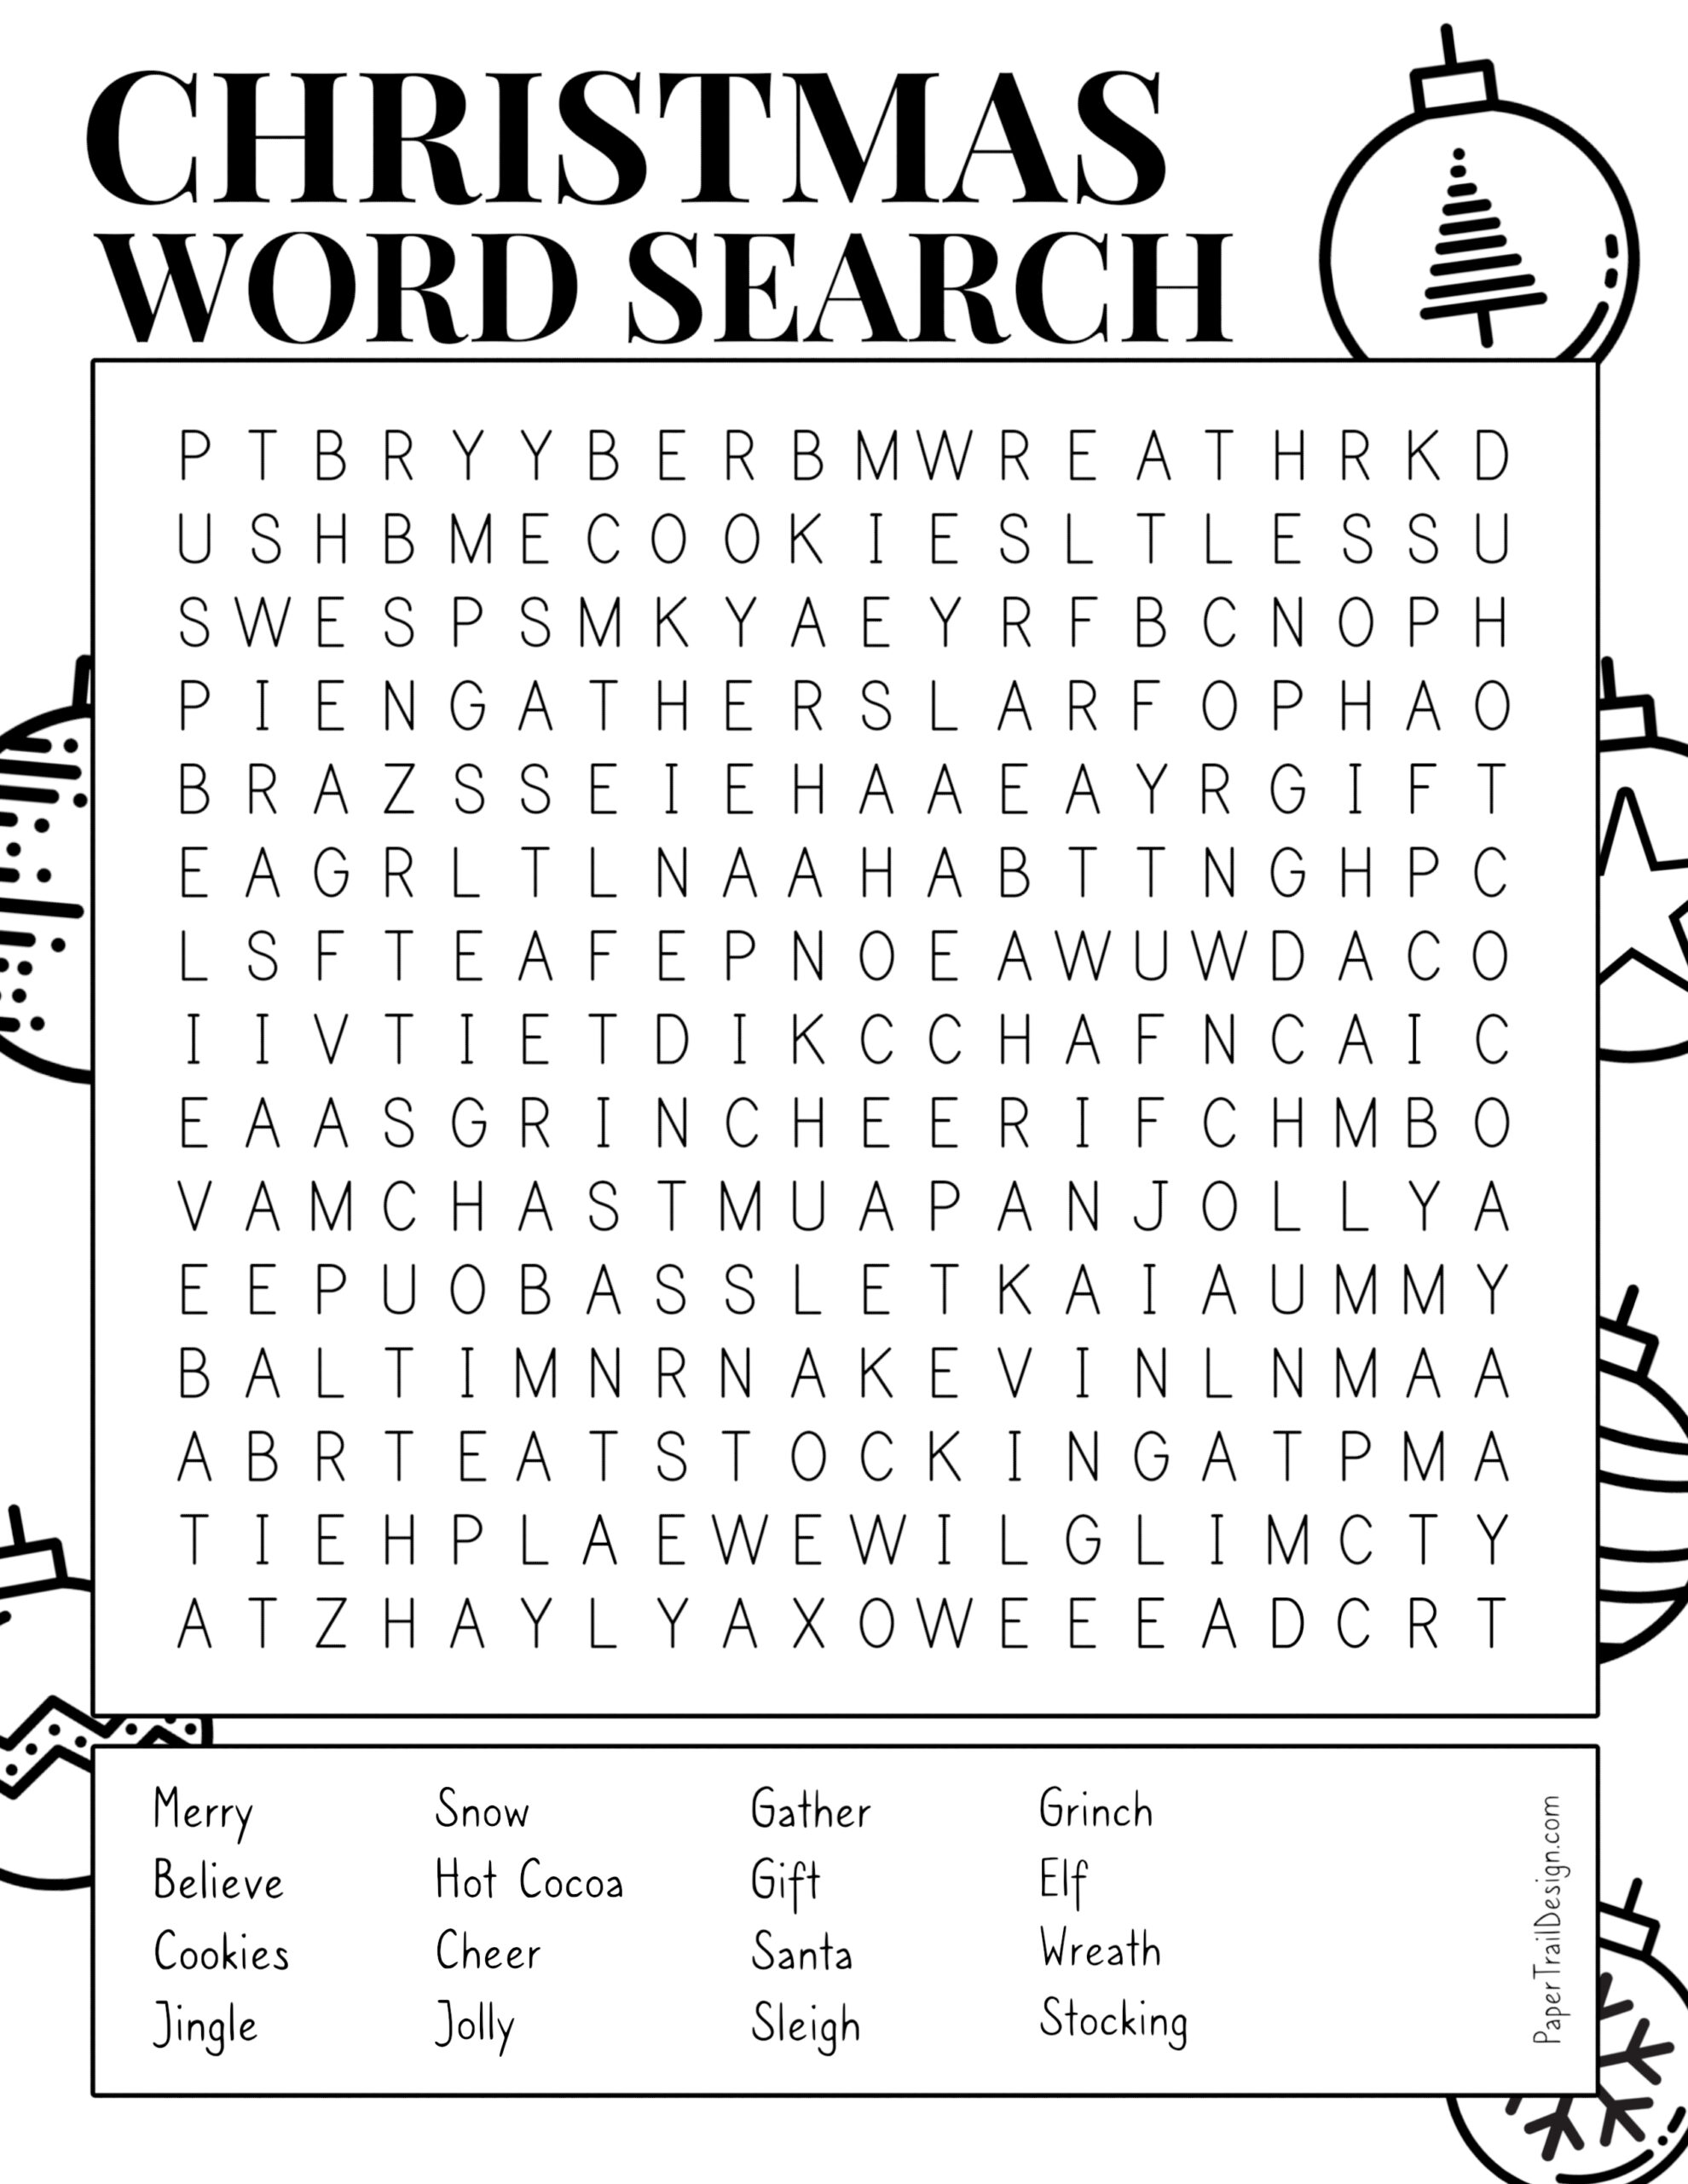 printable-word-searches-26-free-printable-word-search-puzzles-reader